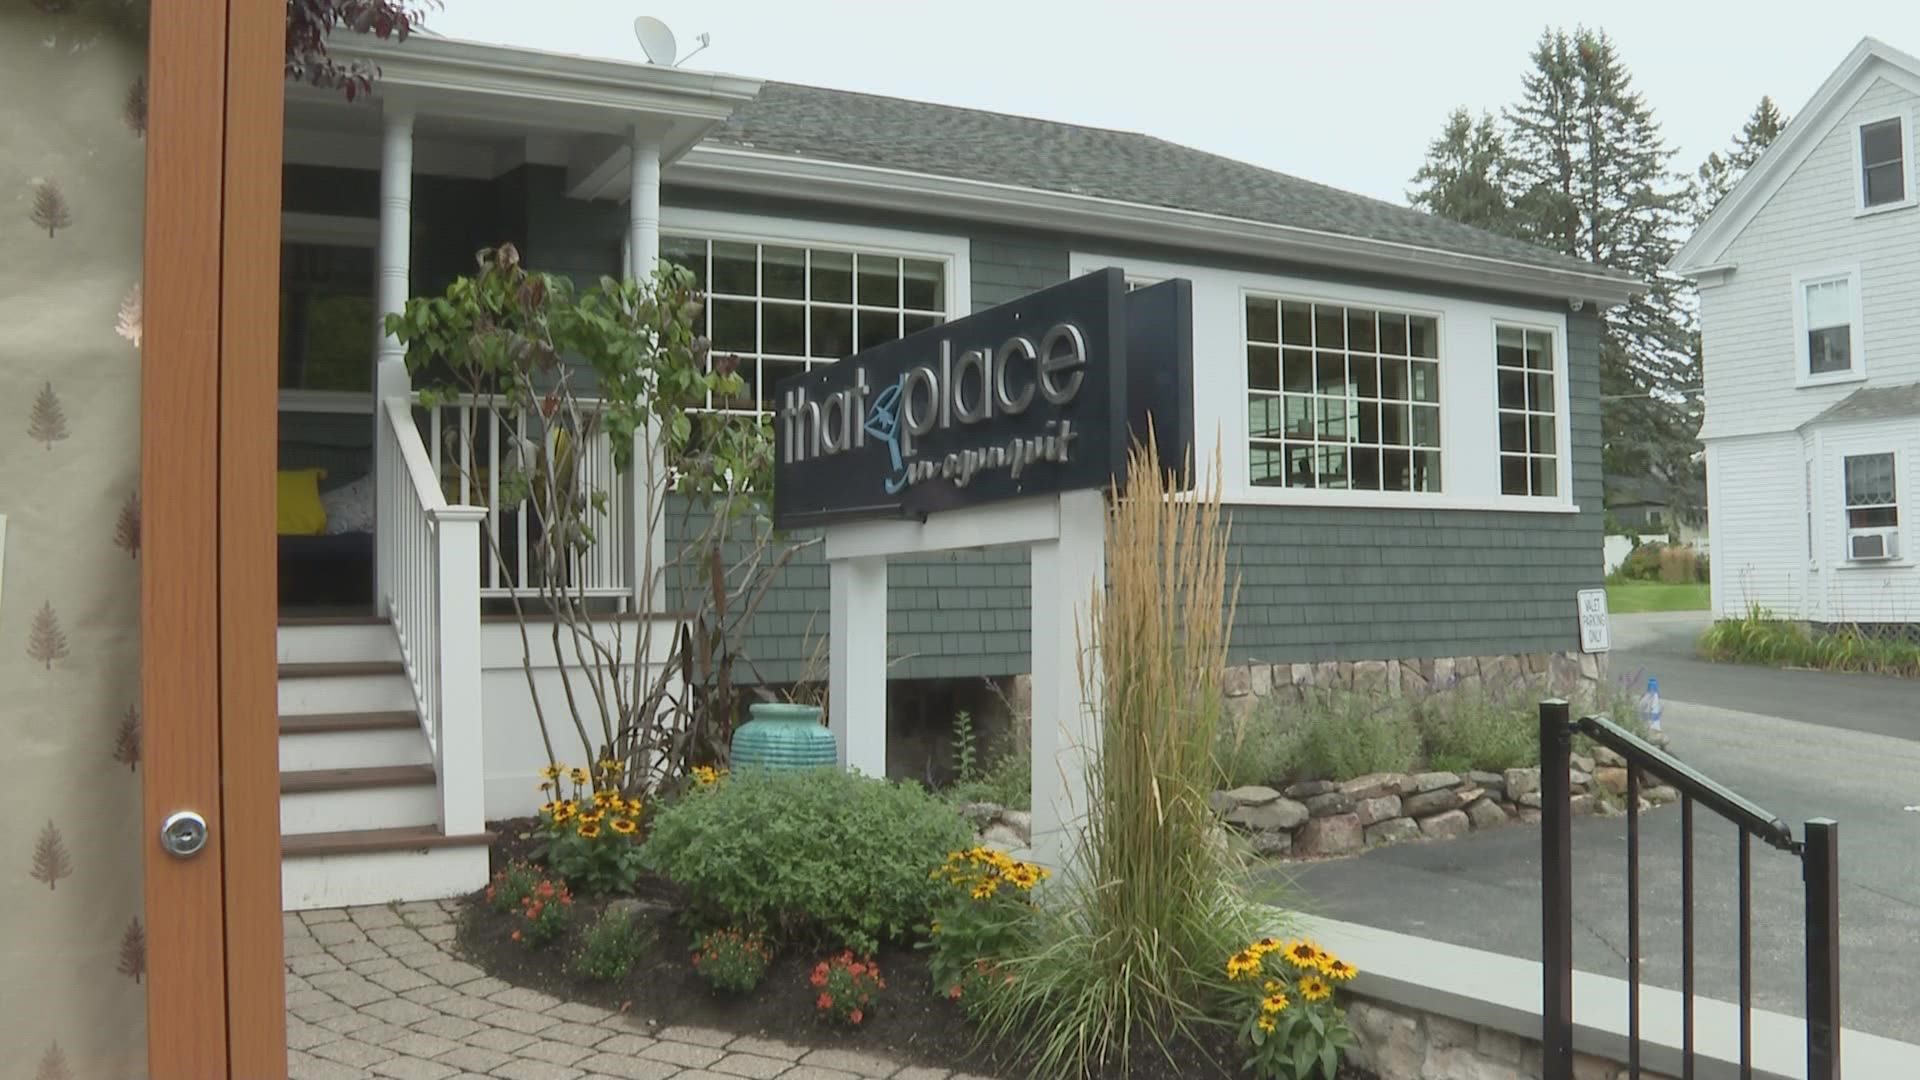 An Ogunquit restaurant owner aims to raise $100,000 for childhood cancer resources.